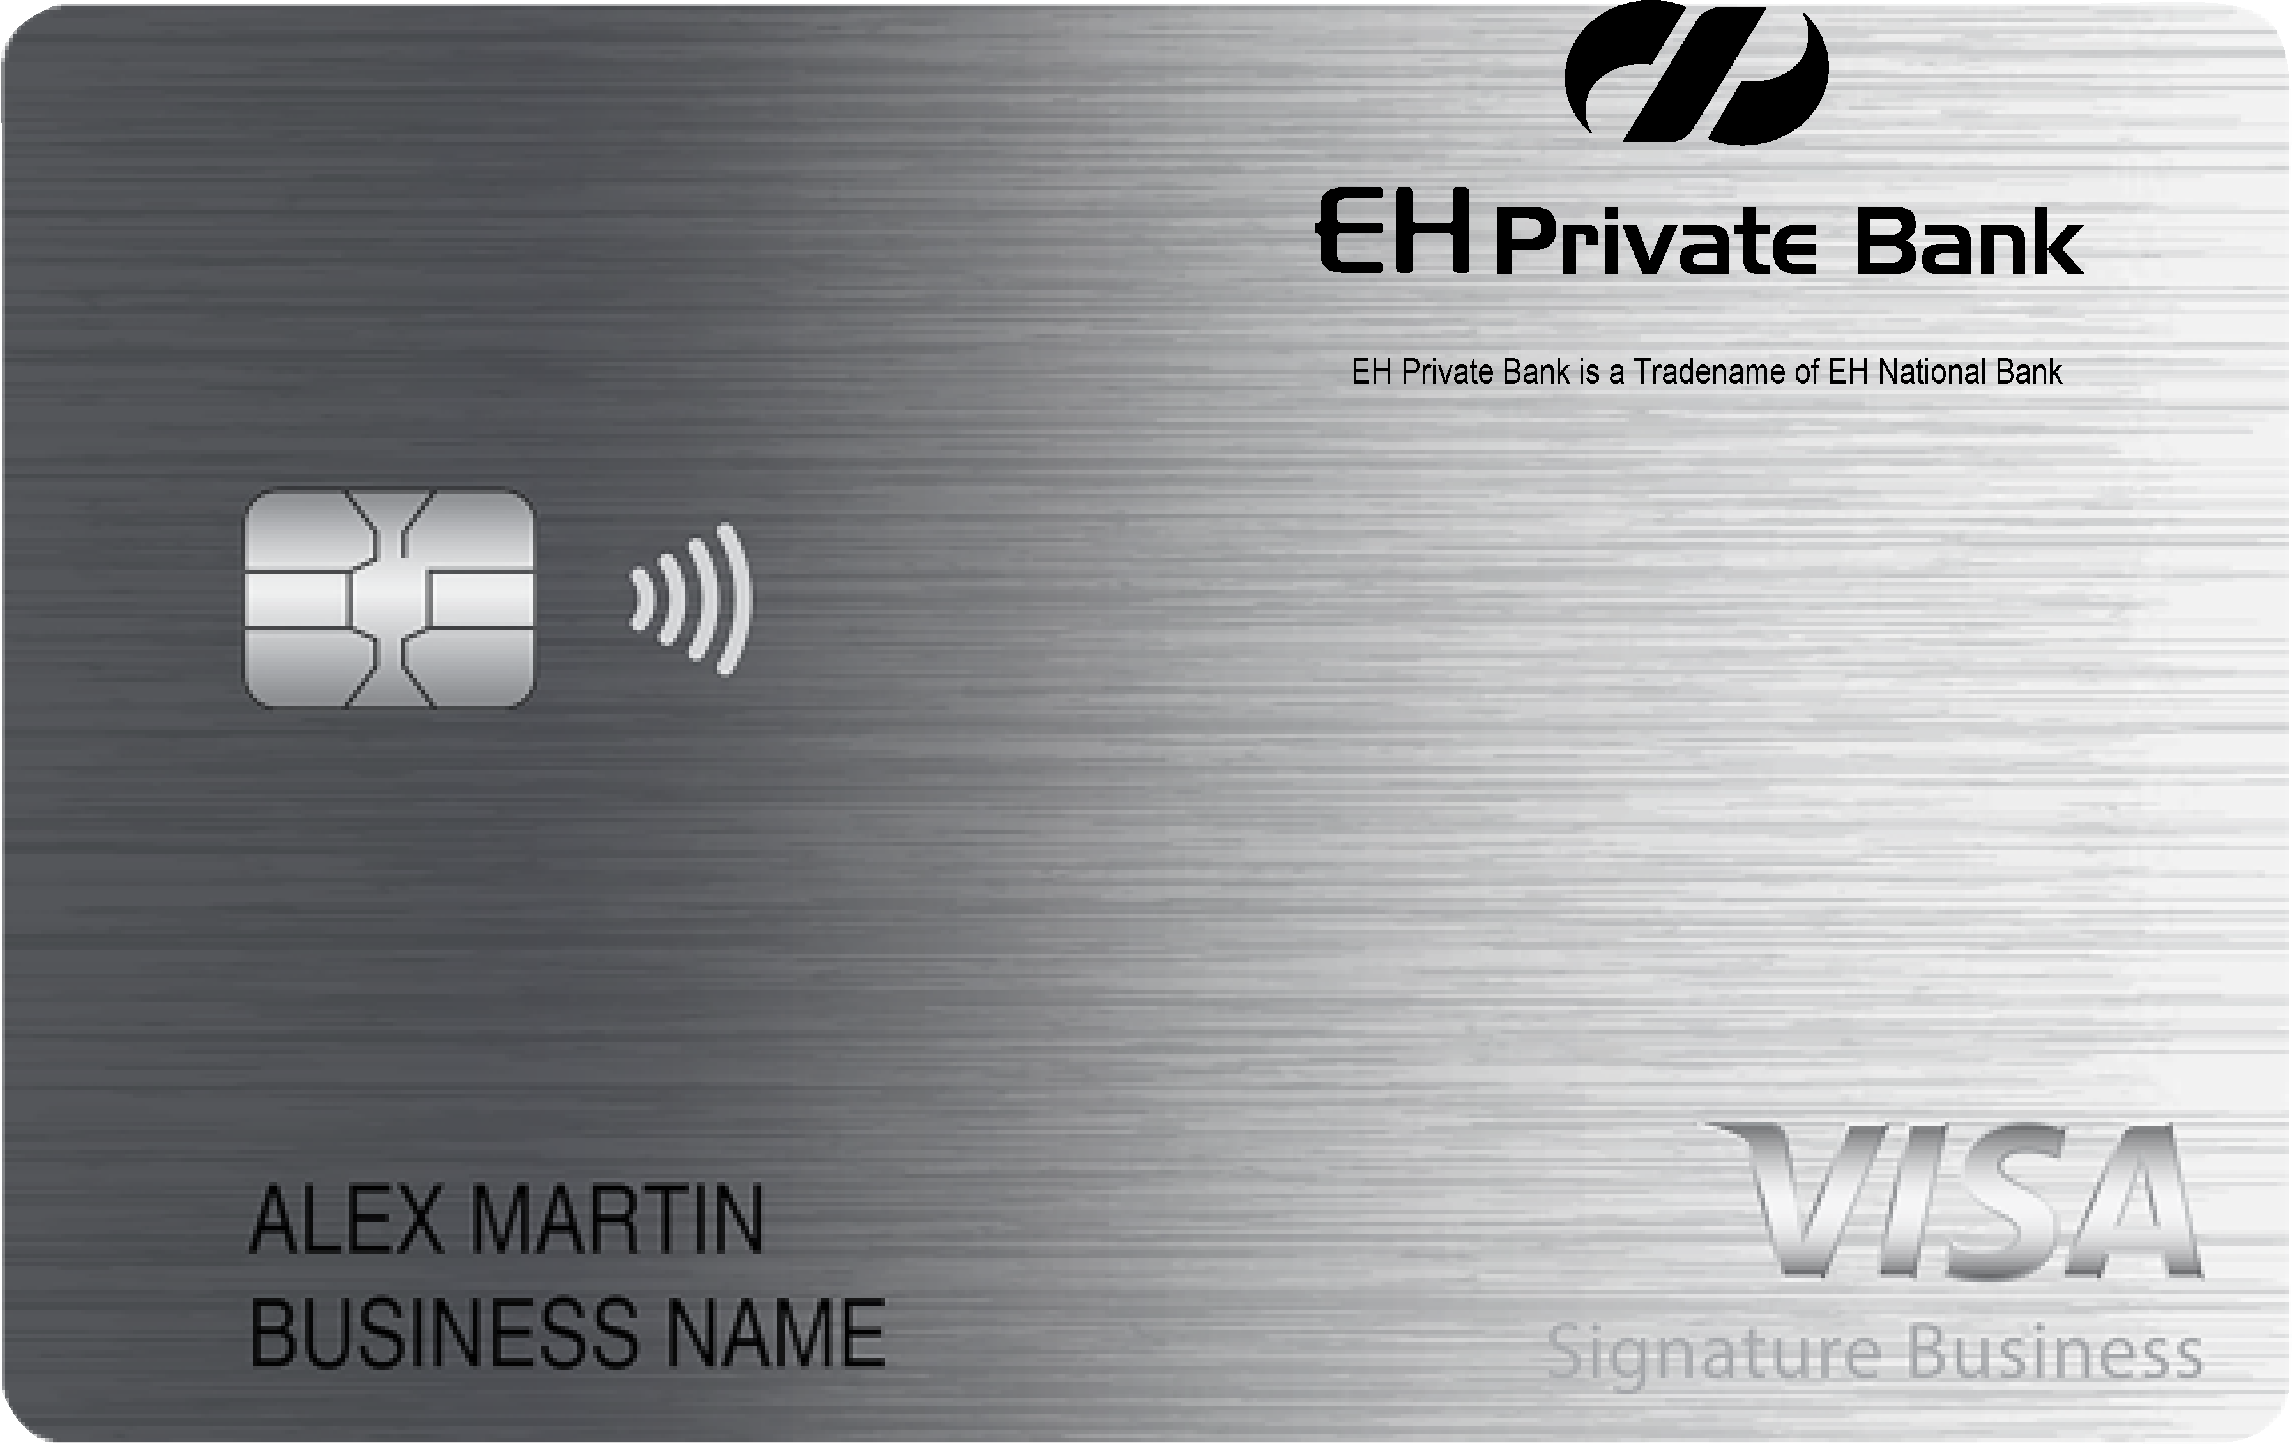 EH Private Bank